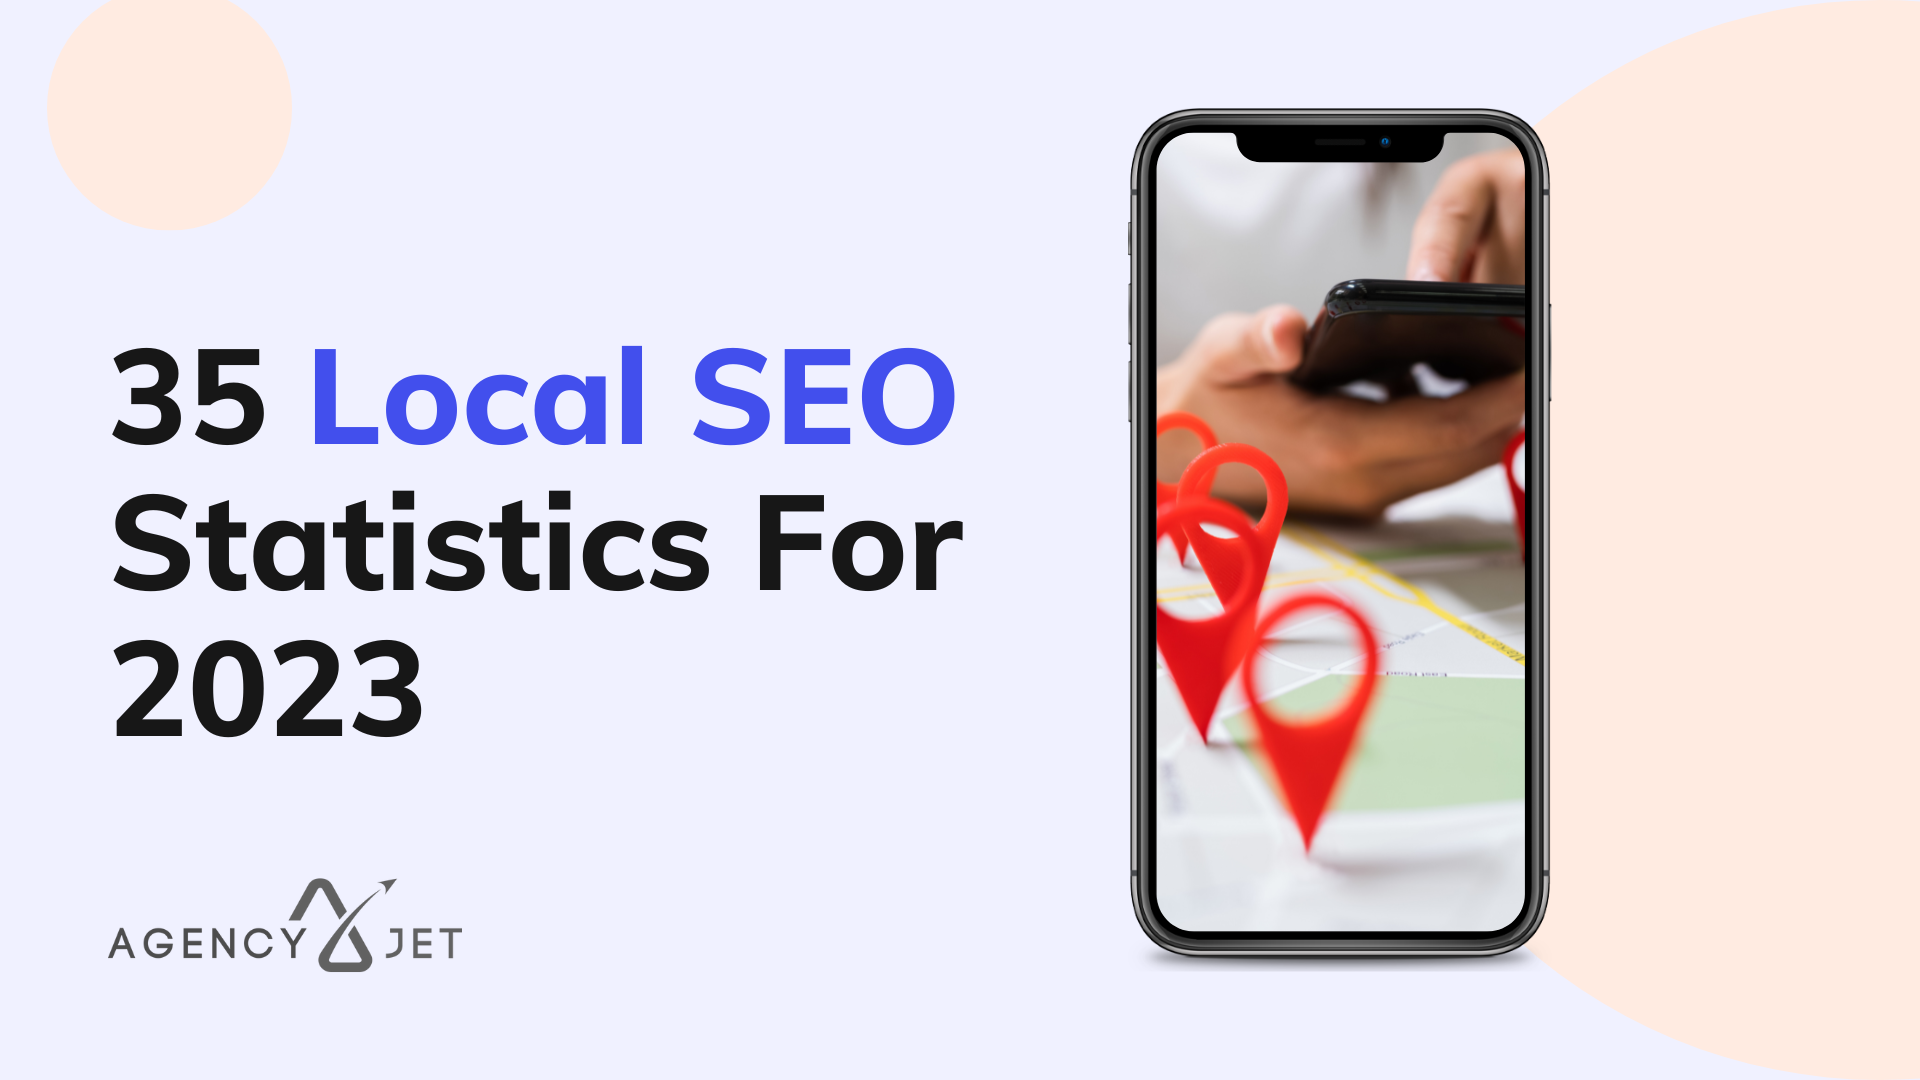 35 Local SEO Statistics For 2023 - Agency Jet